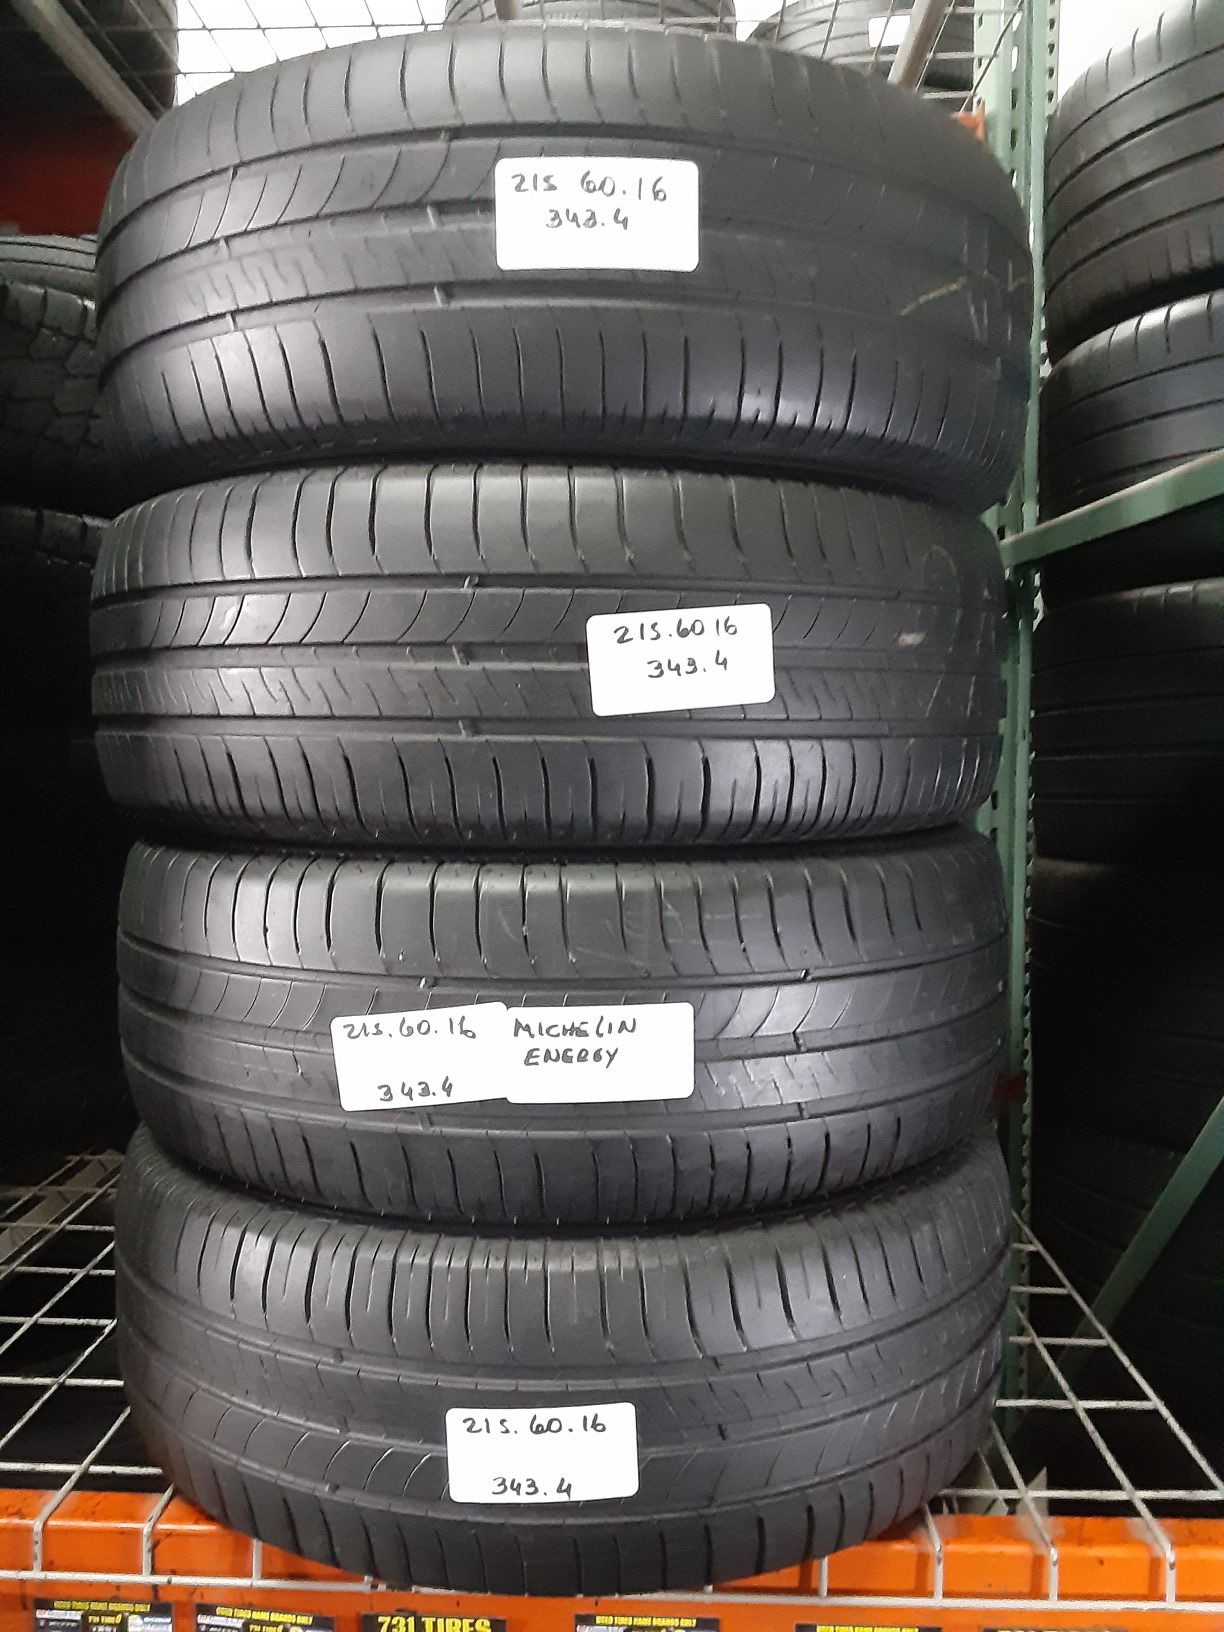 (4) USED TIRES P215/60R16 MICHELIN ENERGY SAVER A/S 216/60R16 ALL SEASON TOURING CAR TIRES 215 60 16